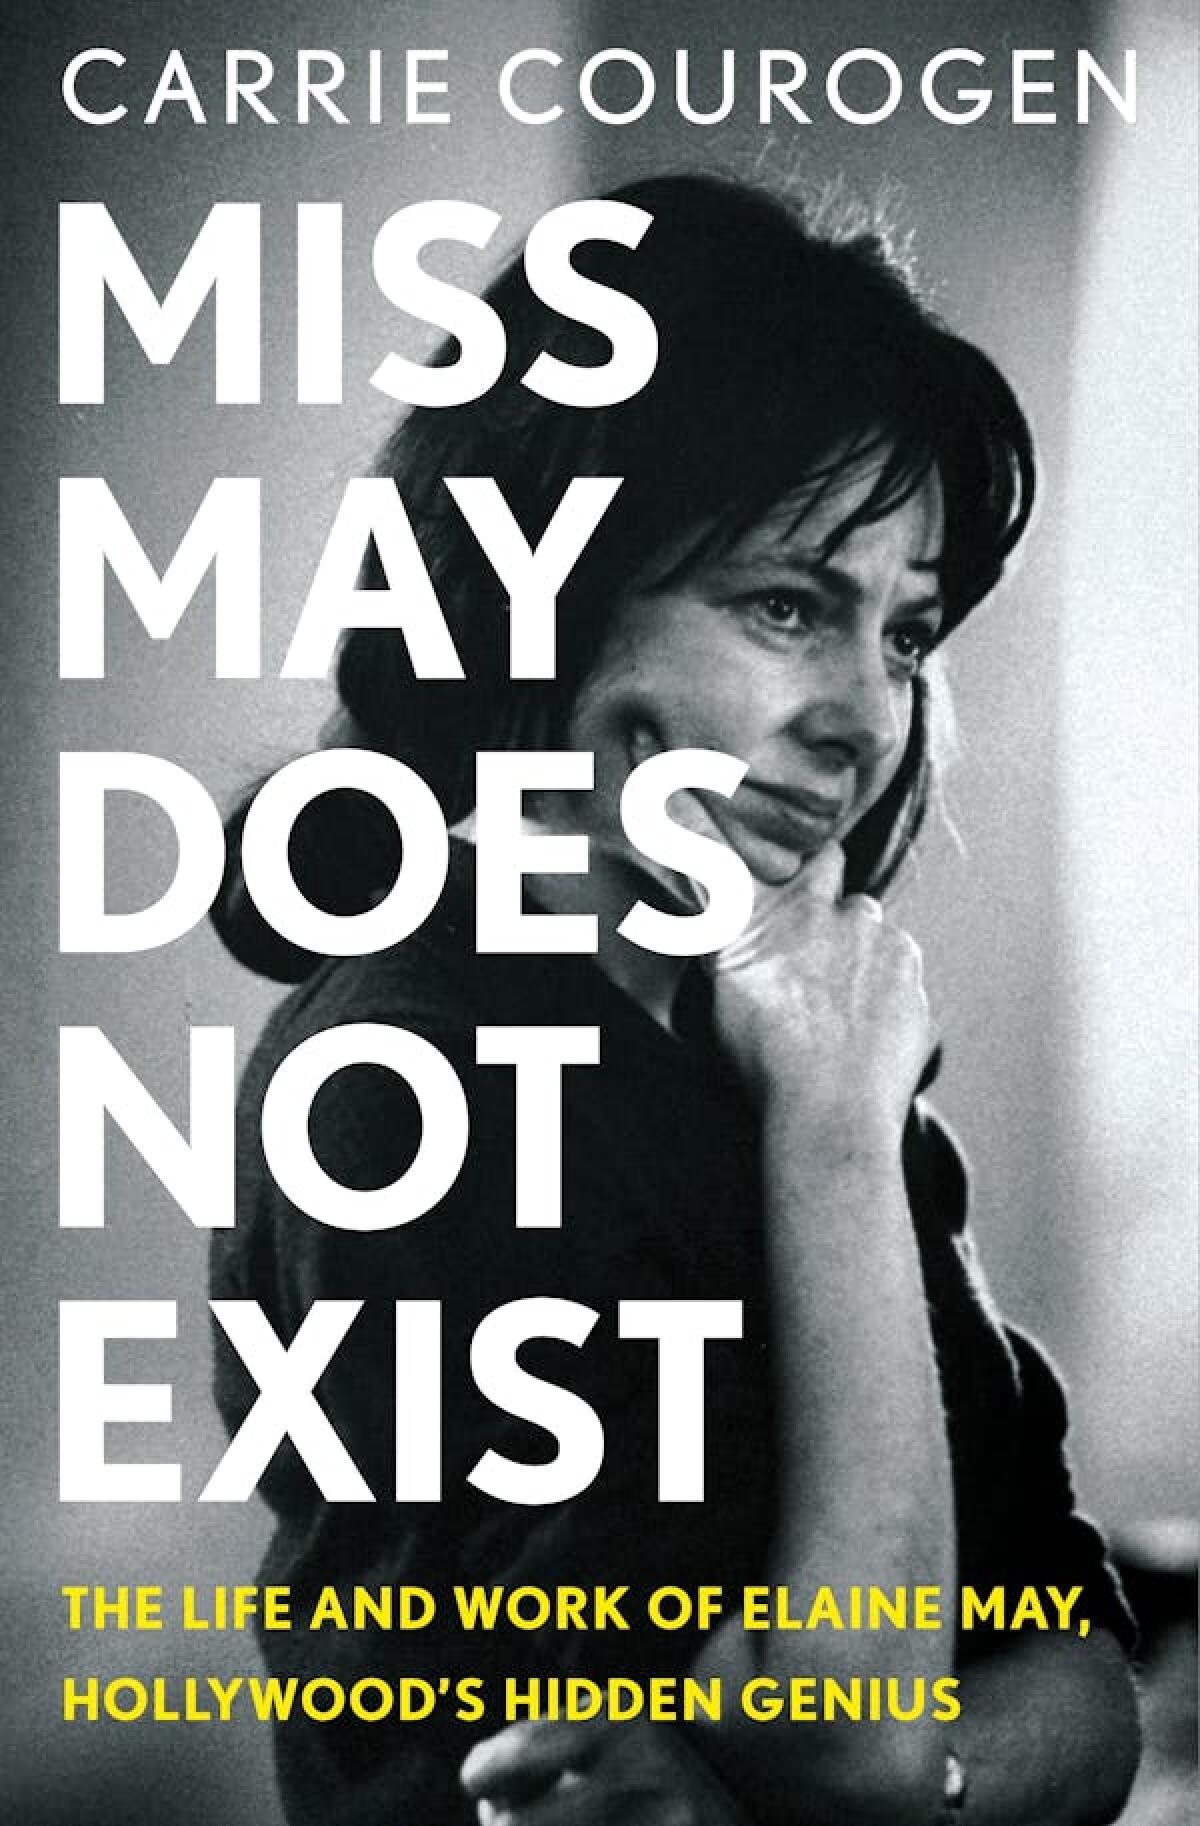 The cover of "Miss May Does Not Exist"